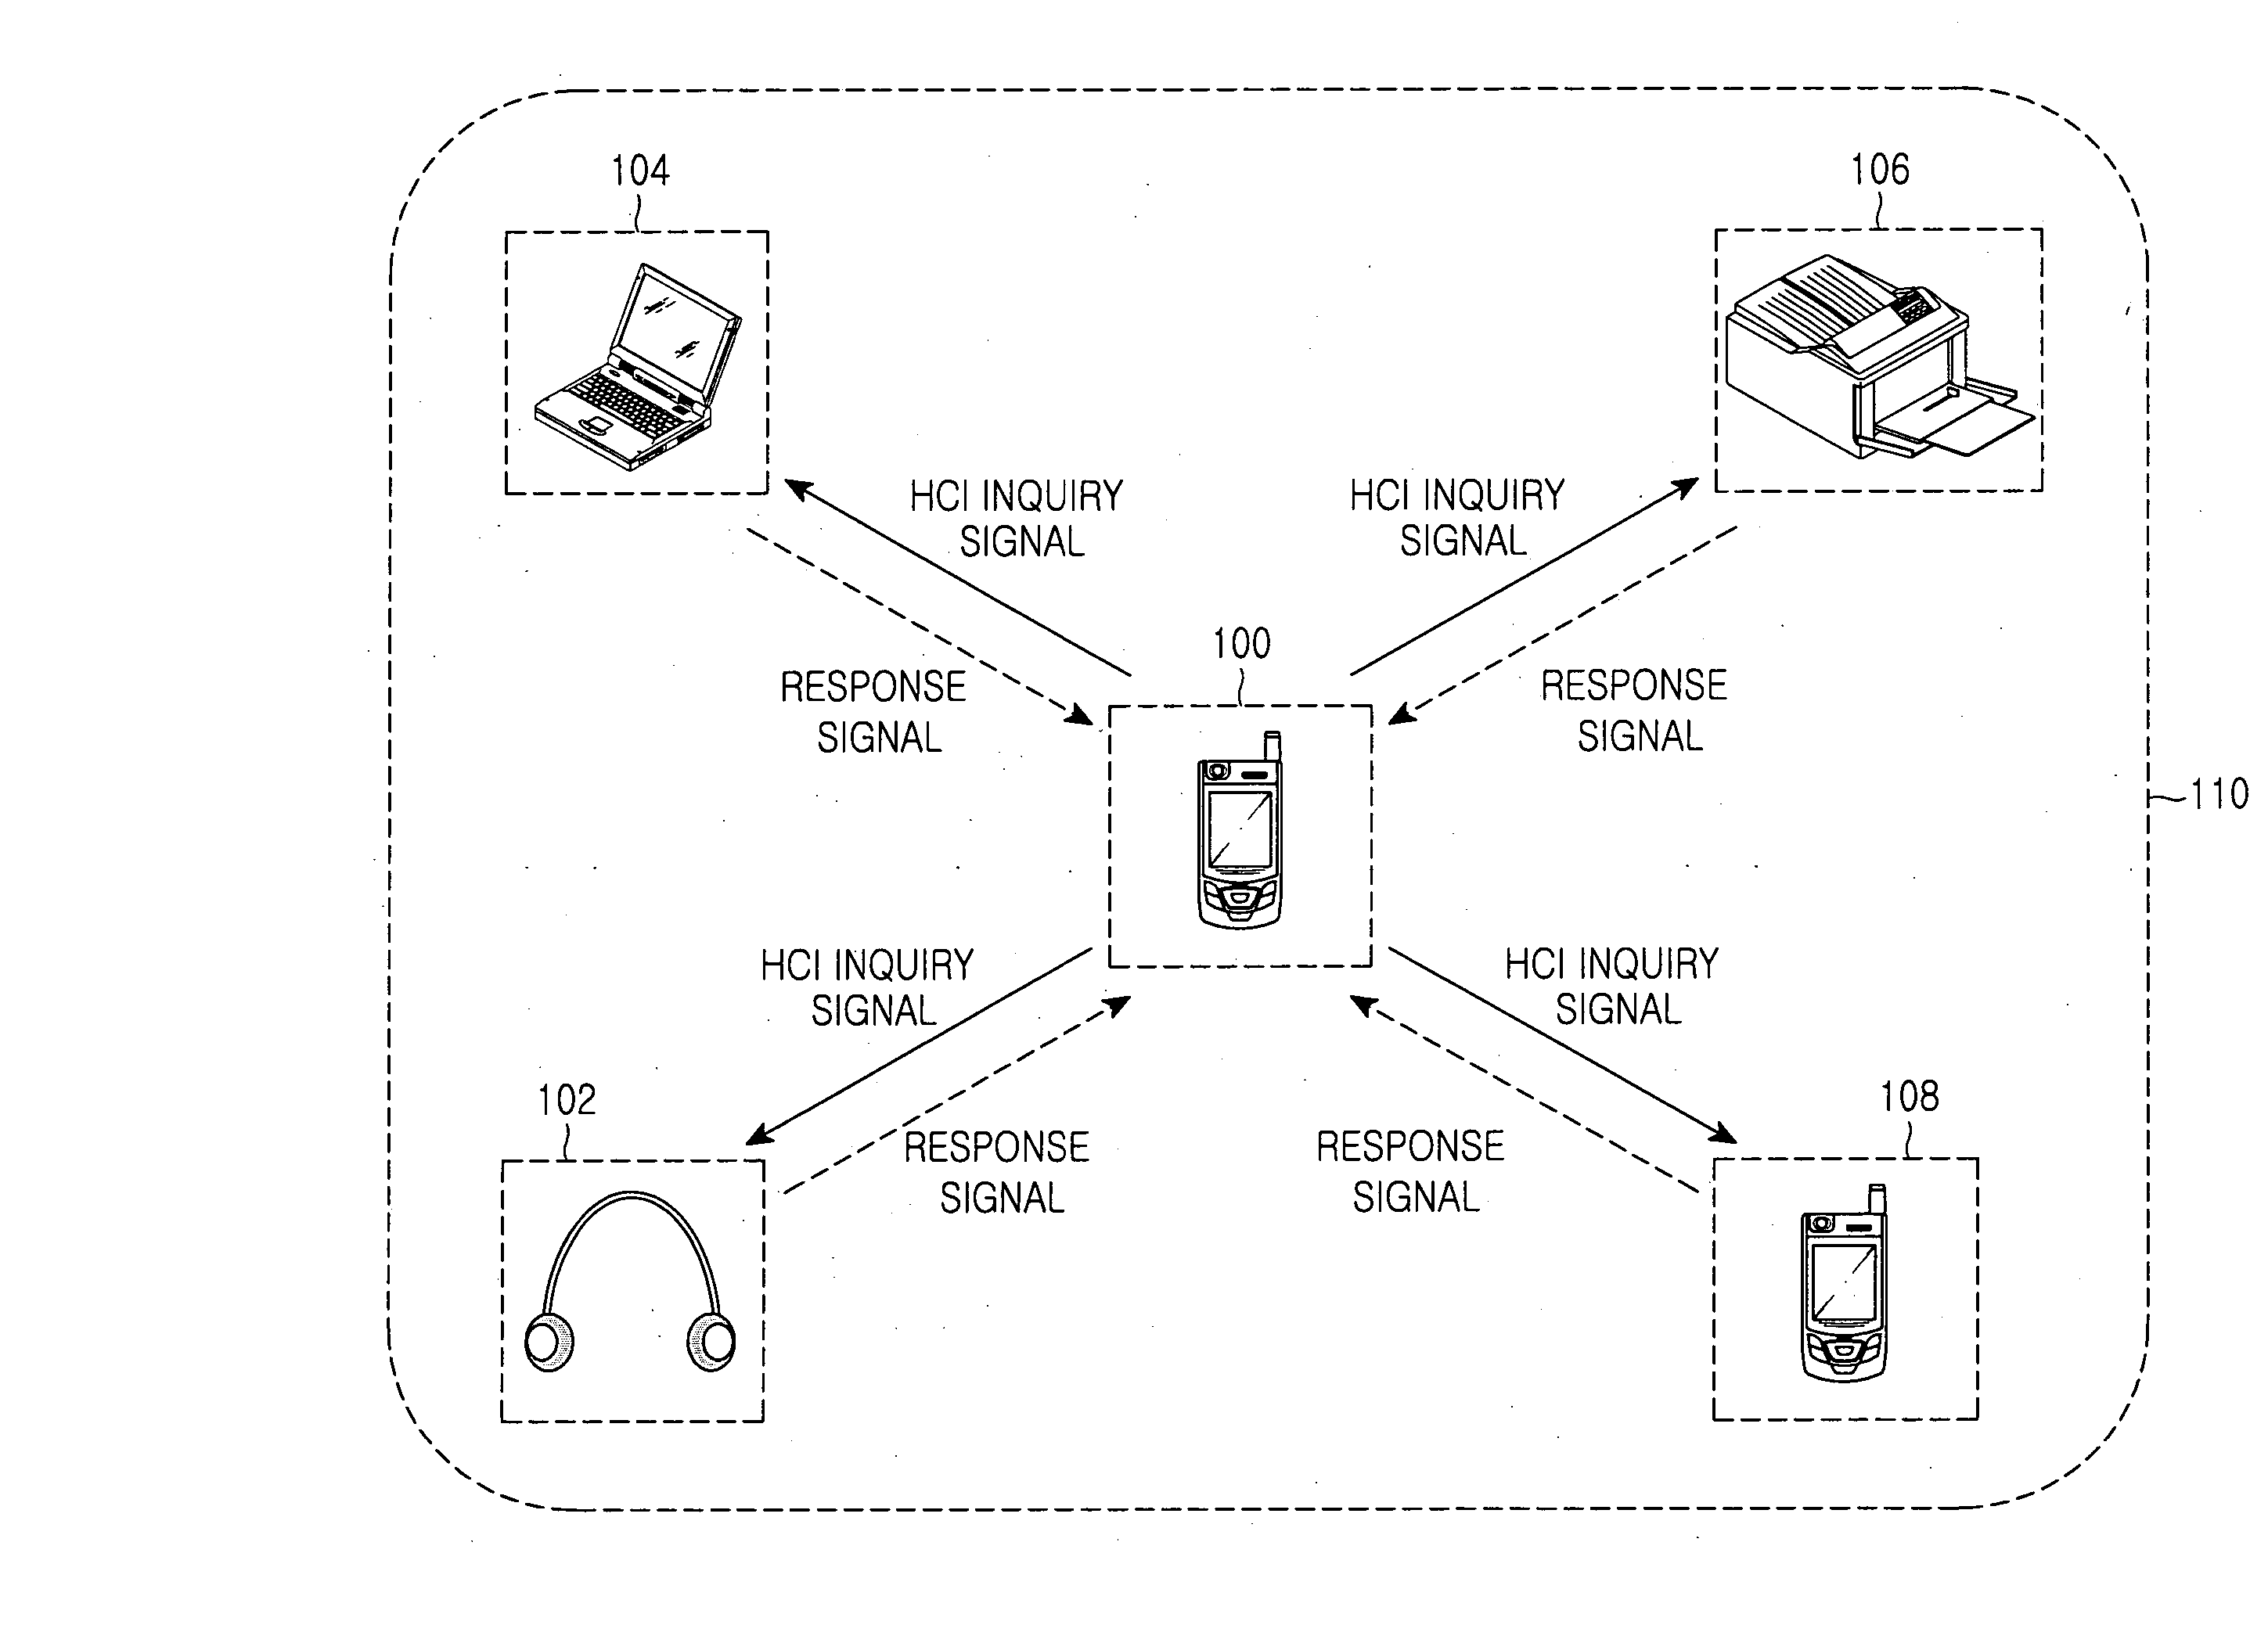 Device and method for searching for and connecting to bluetooth devices